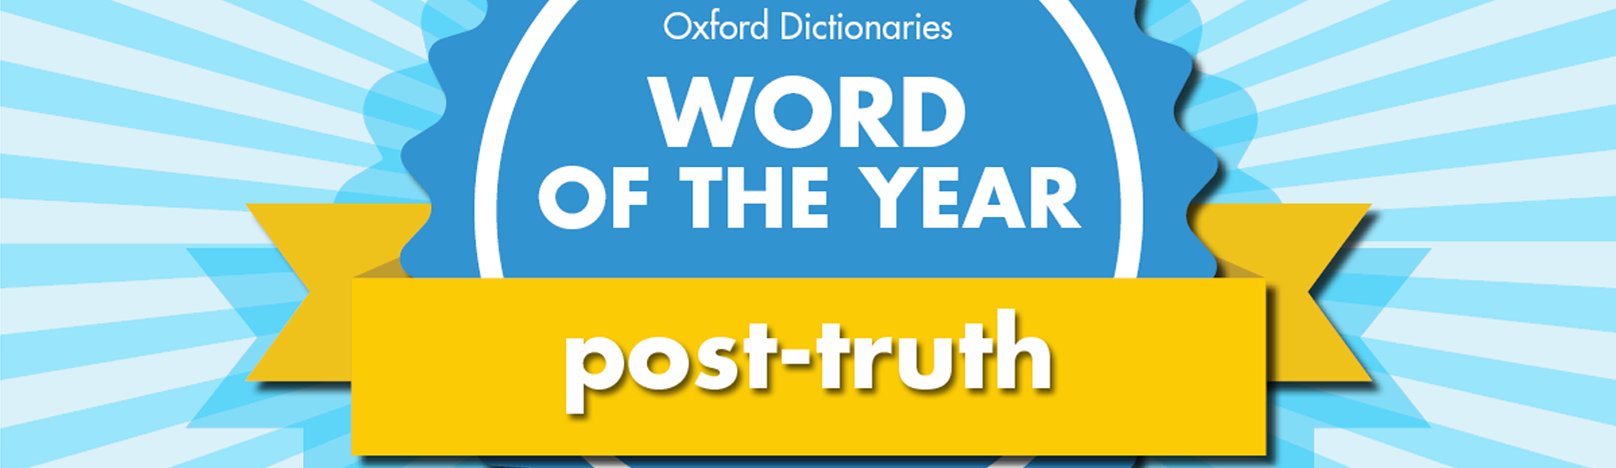 Post-truth word of 2016